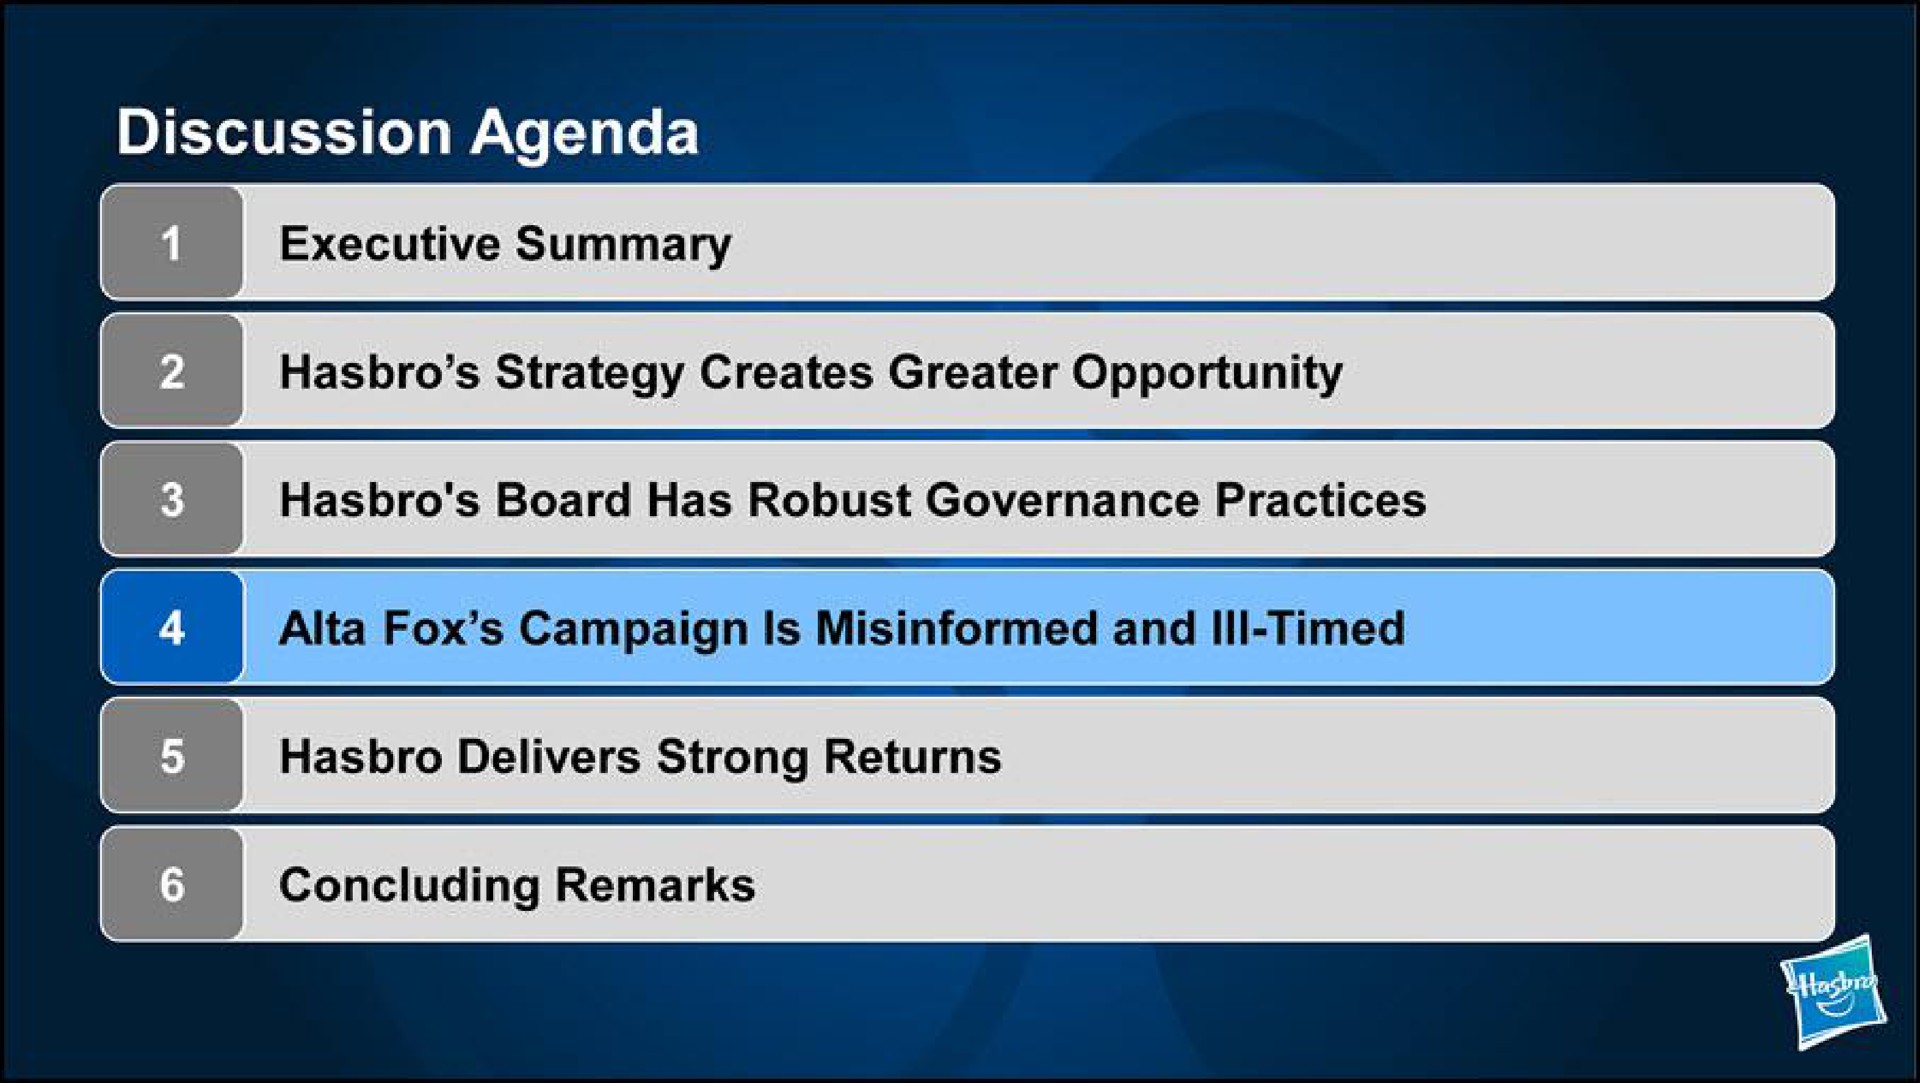 discussion agenda executive summary strategy creates greater opportunity board has robust governance practices delivers strong returns fox campaign is misinformed and ill timed concluding remarks | Hasbro